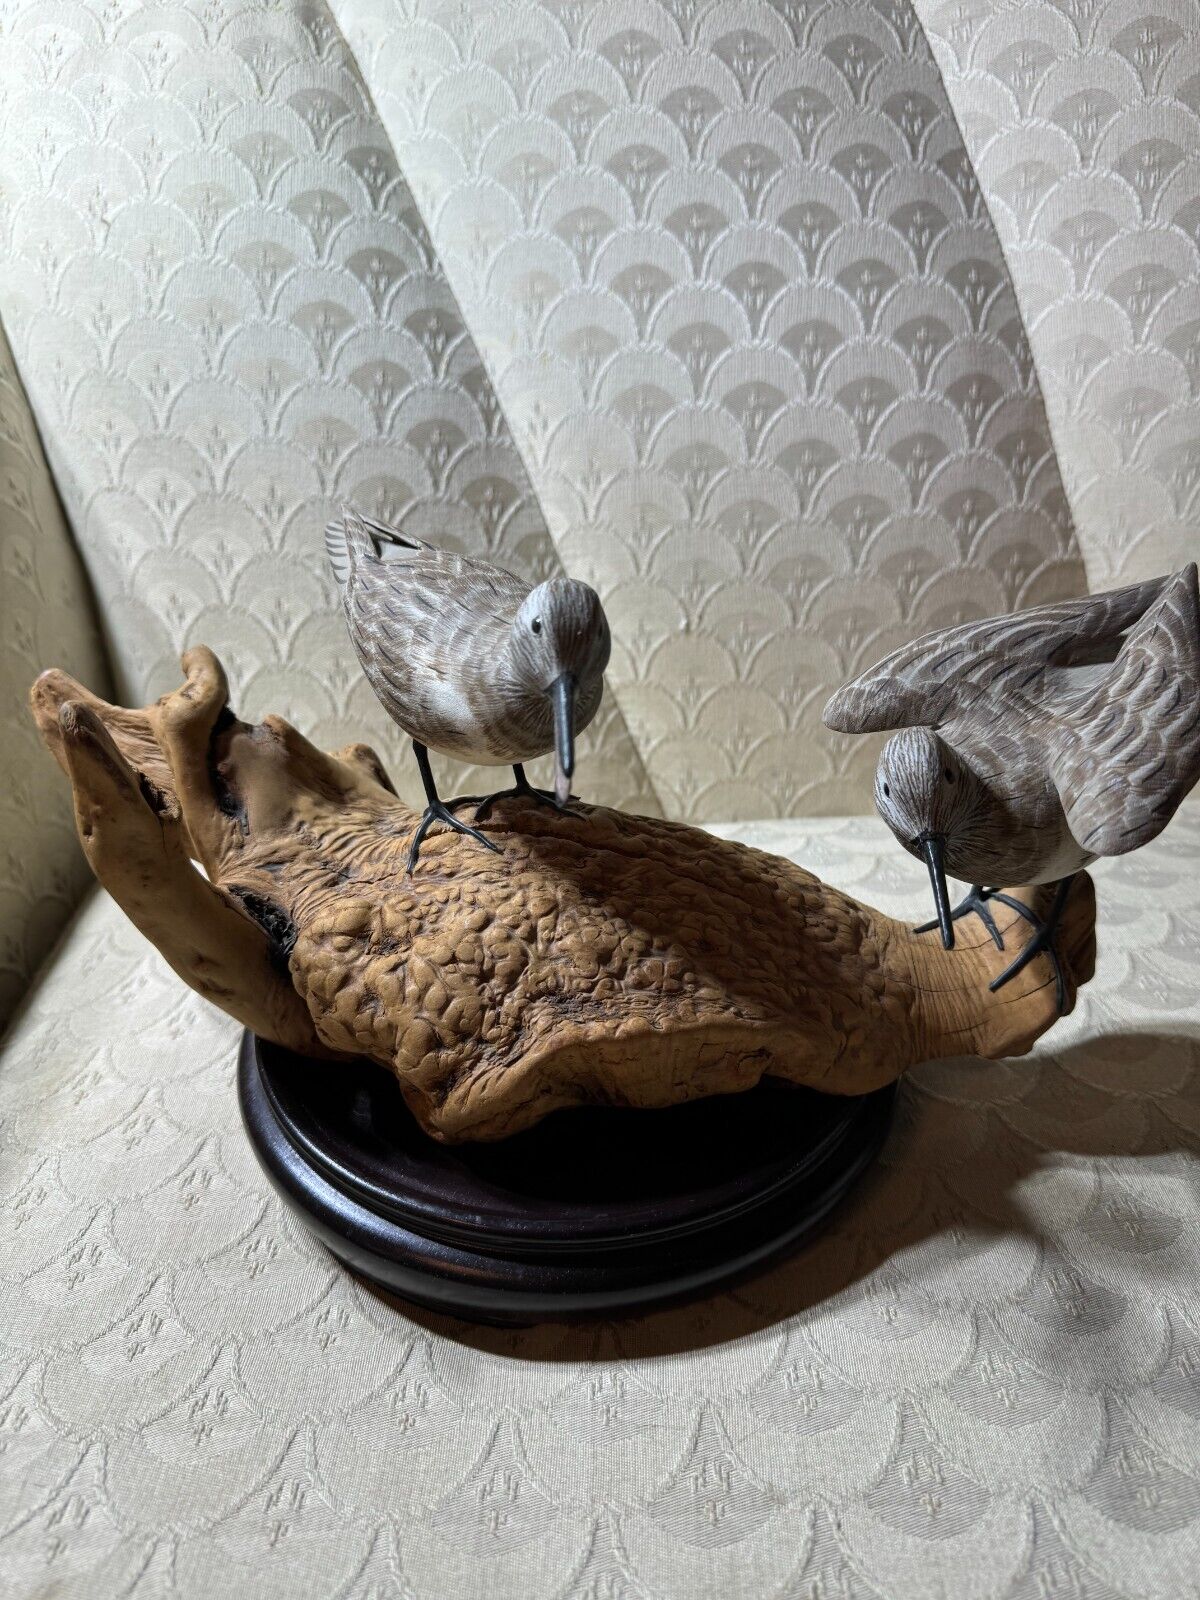 John & Patty Wood Carved Pair Sandpipers with Driftwood Base - 14.0 Inches Long